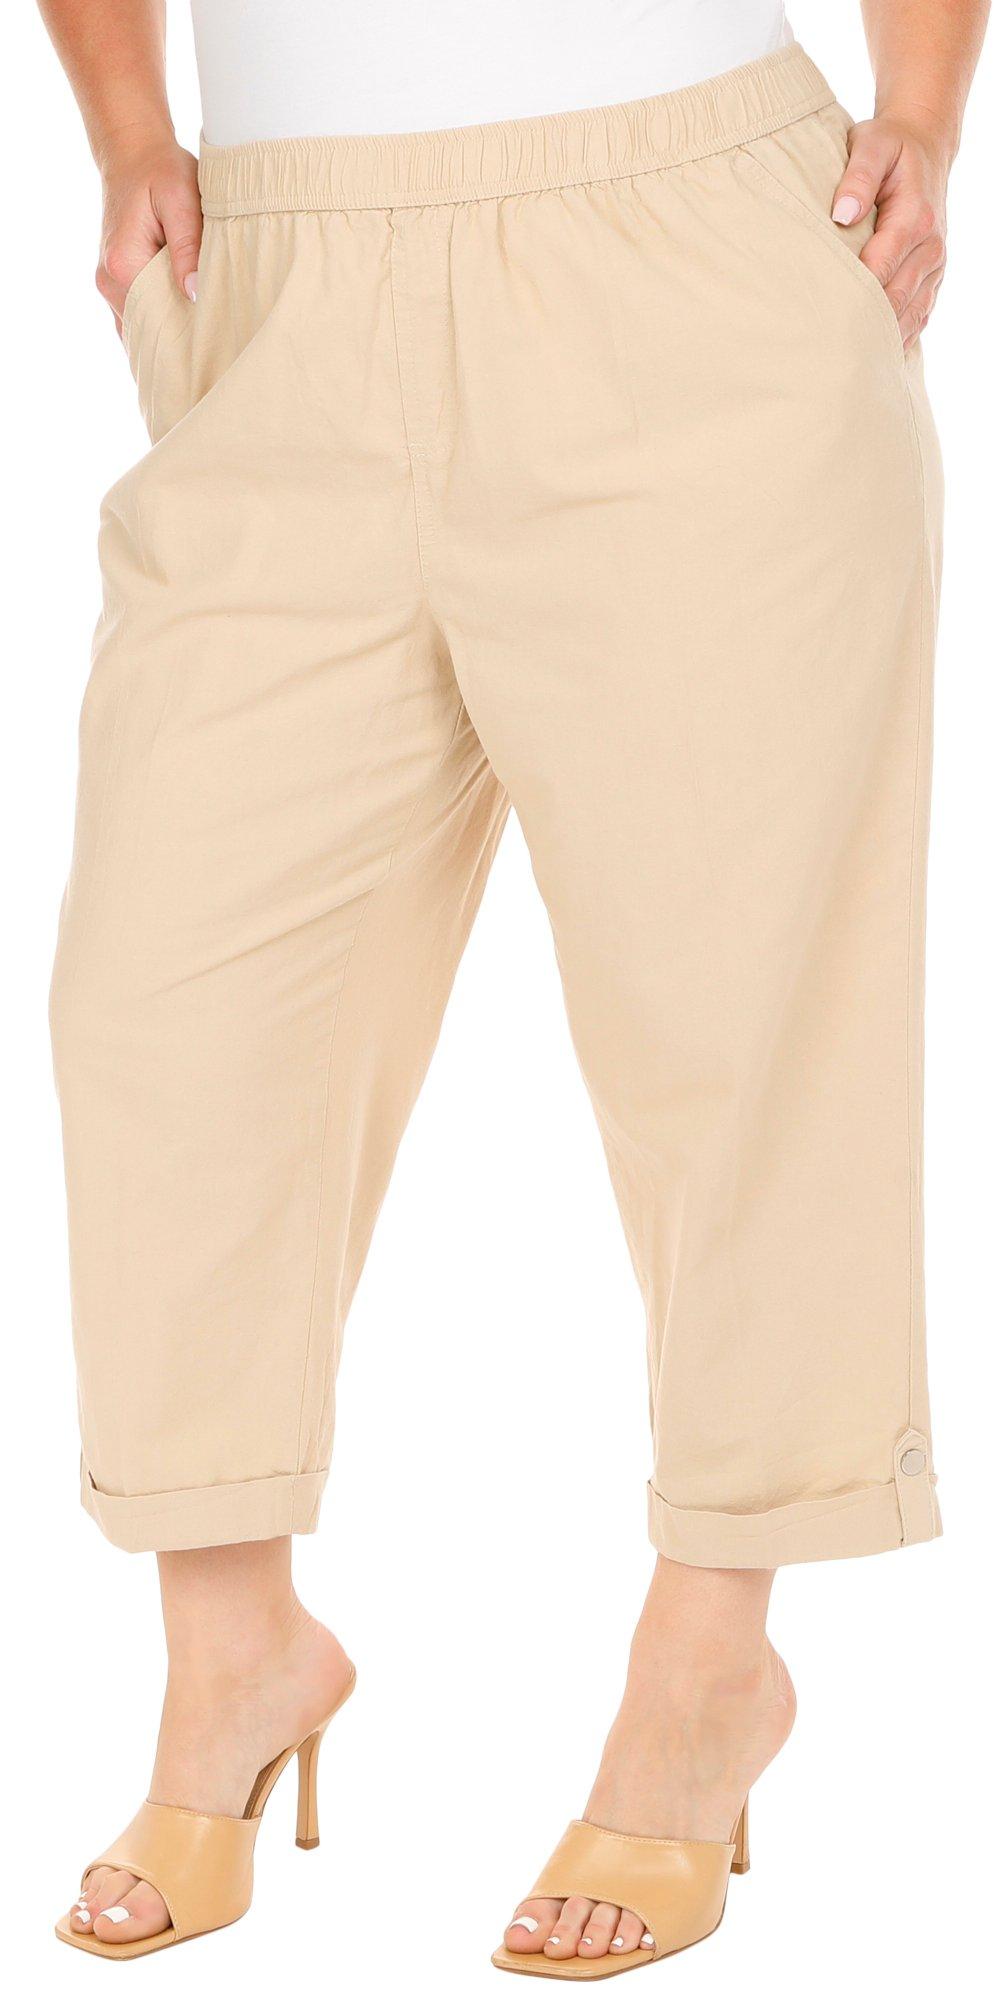 Coral Bay Plus 21in. Solid Sheeting Pull On Capris